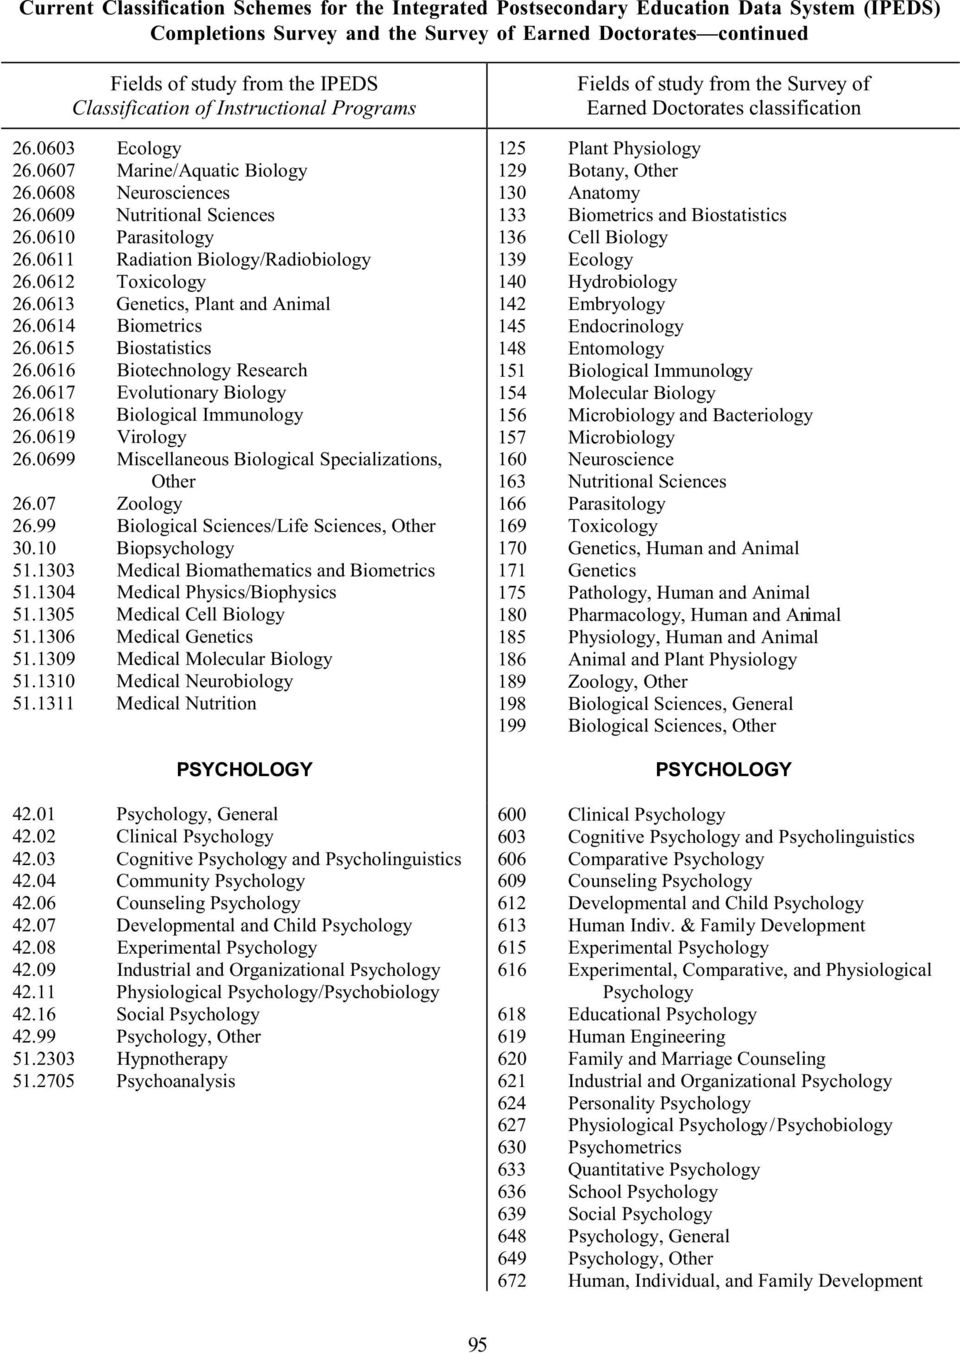 0699 Miscellaneous Biological Specializations, Other 26.07 Zoology 26.99 Biological Sciences/Life Sciences, Other 30.10 Biopsychology 51.1303 Medical Biomathematics and Biometrics 51.